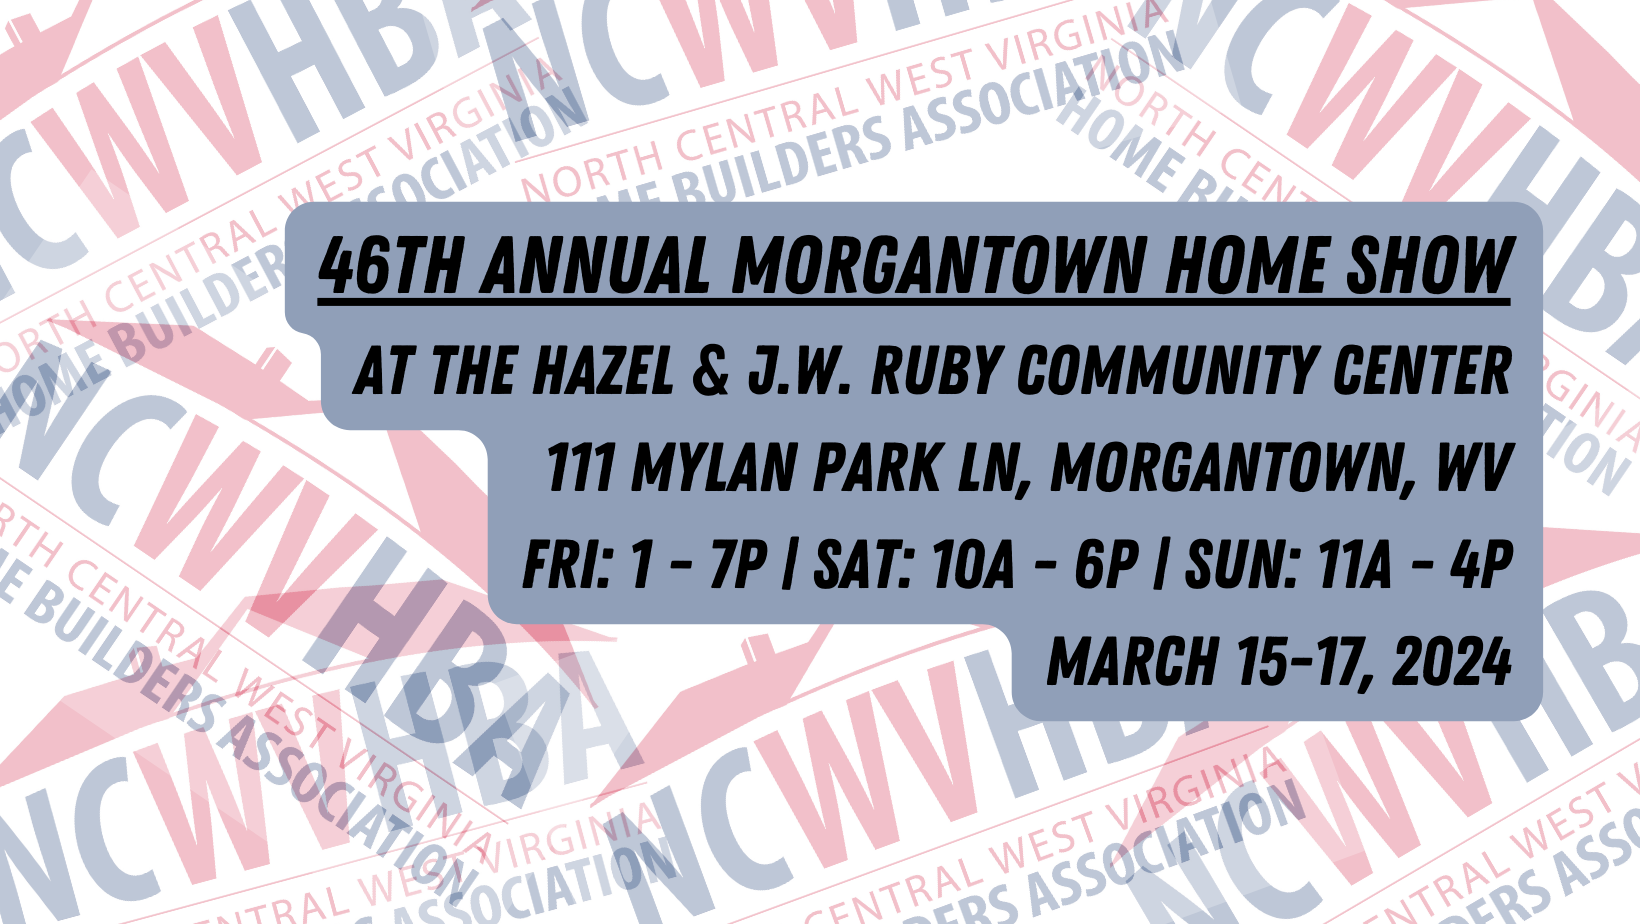 46th Annual Morgantown Home Show AT THE HAZEL & J.W. RUBY COMMUNITY CENTER